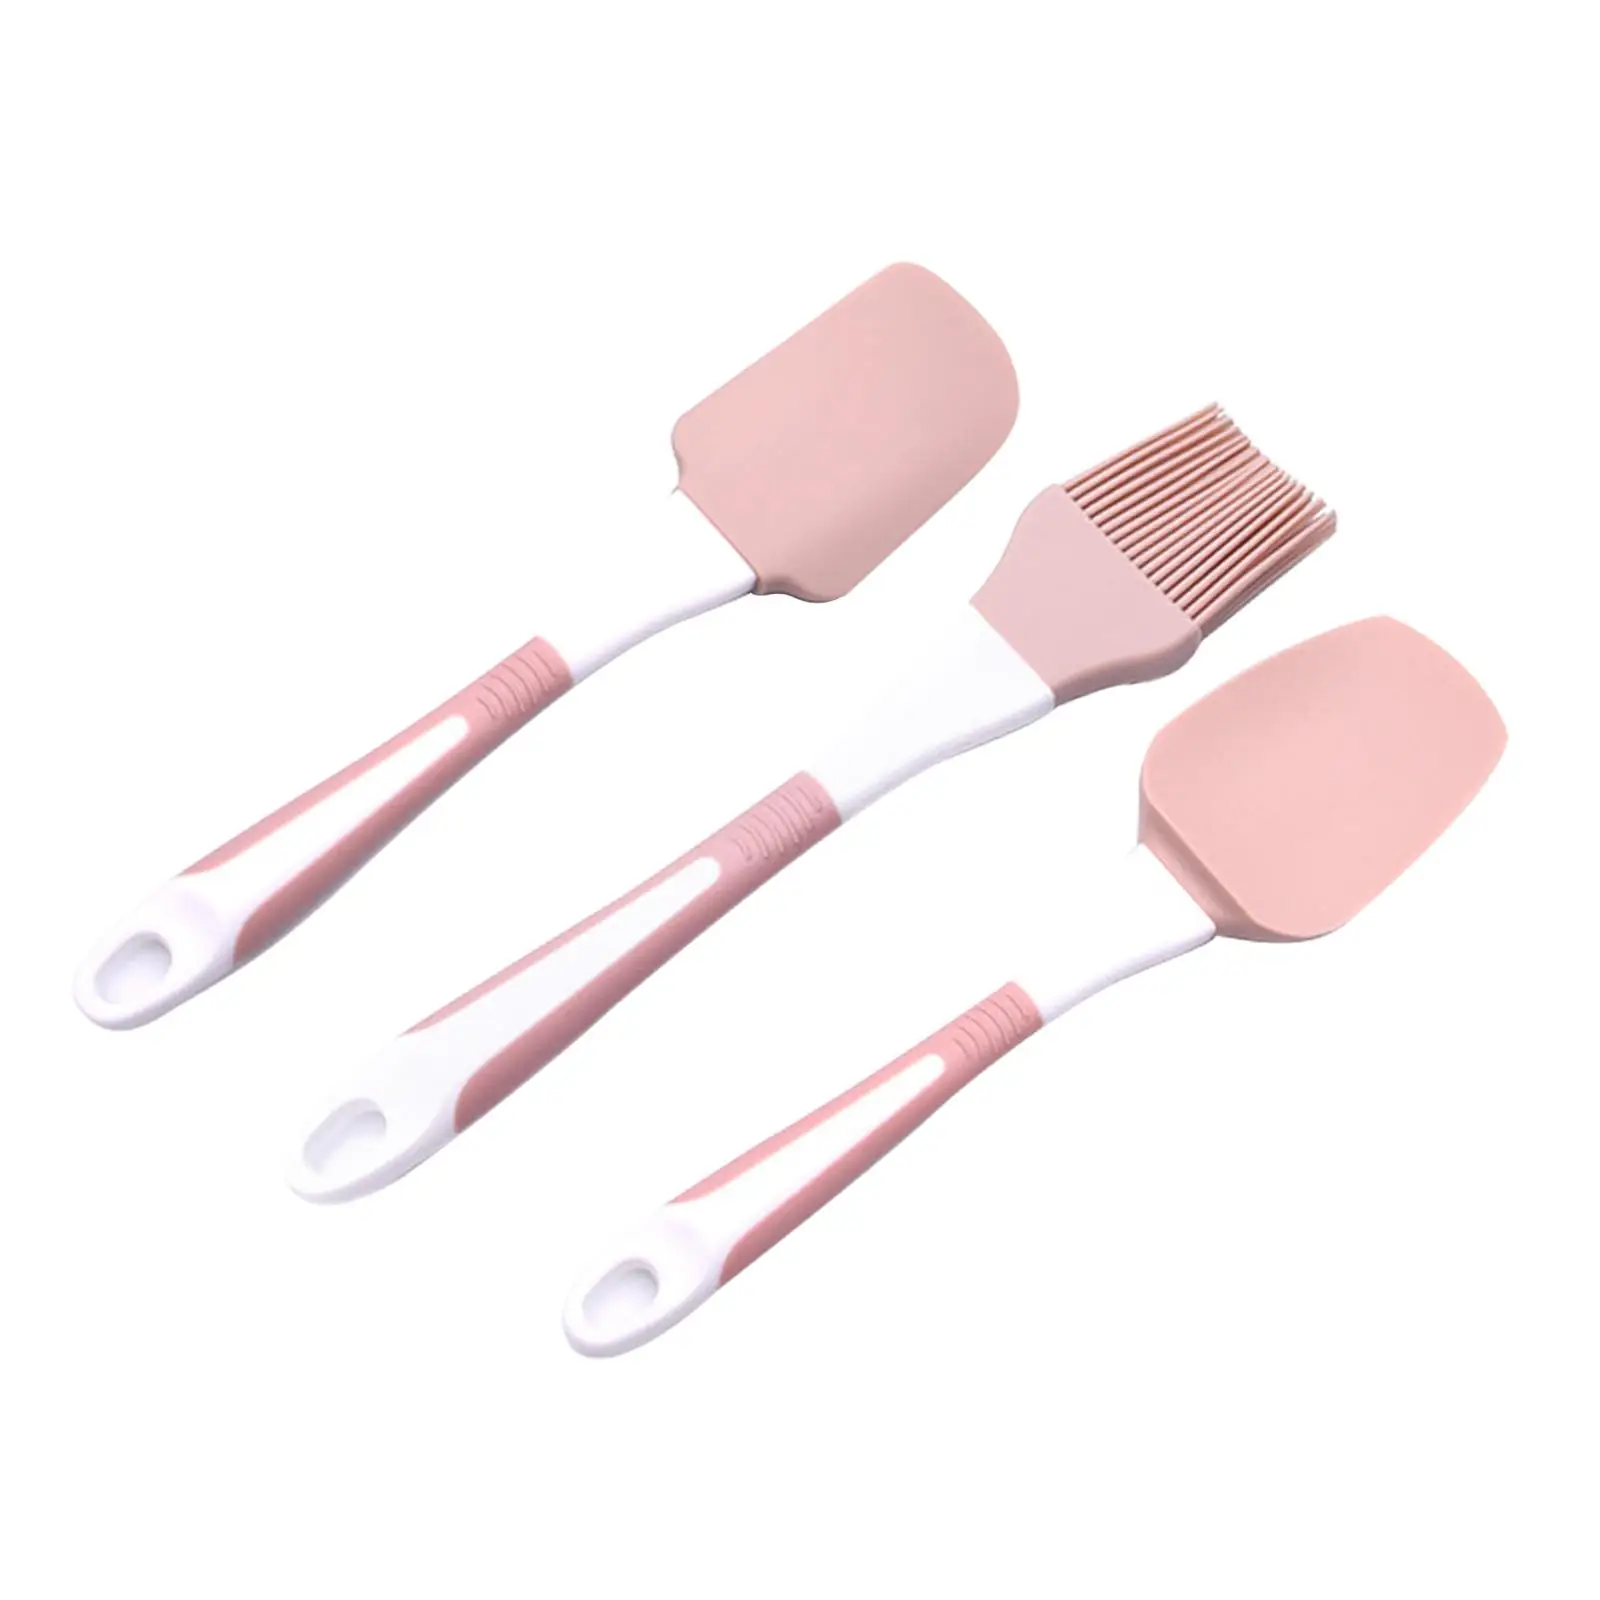 Multifunctional Silicone Baking Utensils Detachable Heat Resistant DIY Tool Non Sticky for Baking Cooking Cake Barbecue Bread